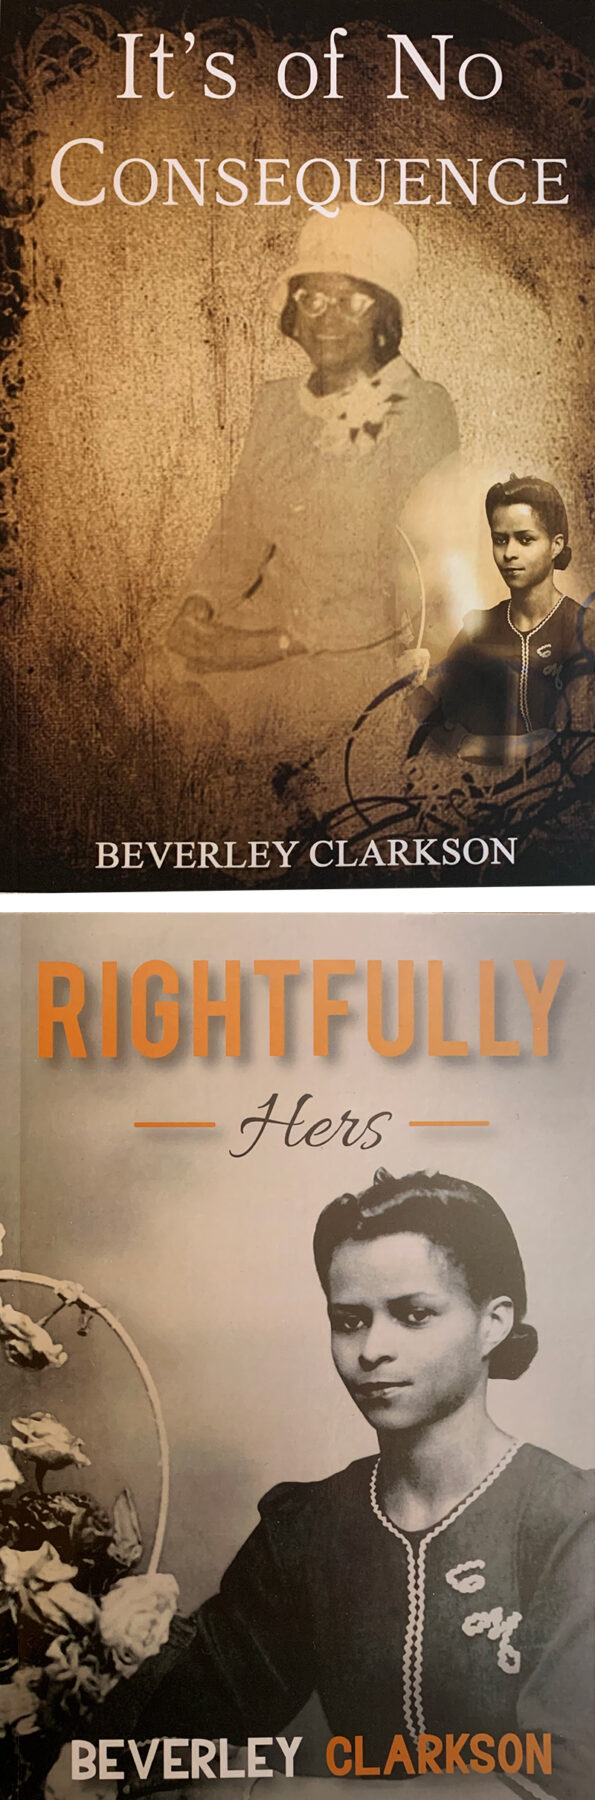 books covers of "It's of No Consequence" and "Rightfully Hers" by Beverley Clarkson